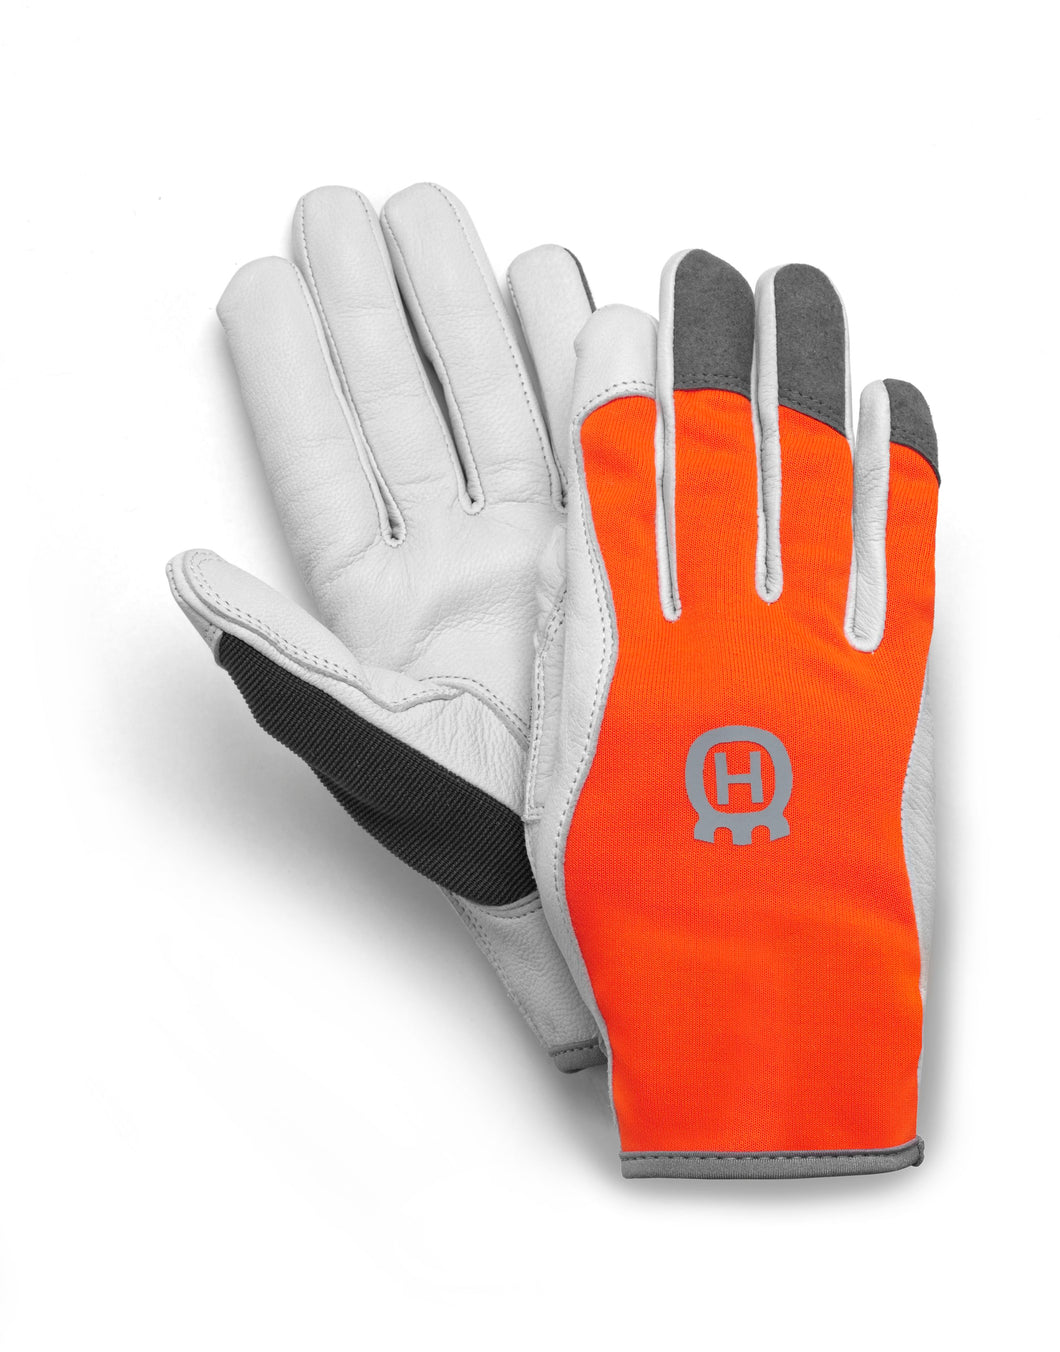 Husqvarna functional Light Gloves - Without Saw Protection